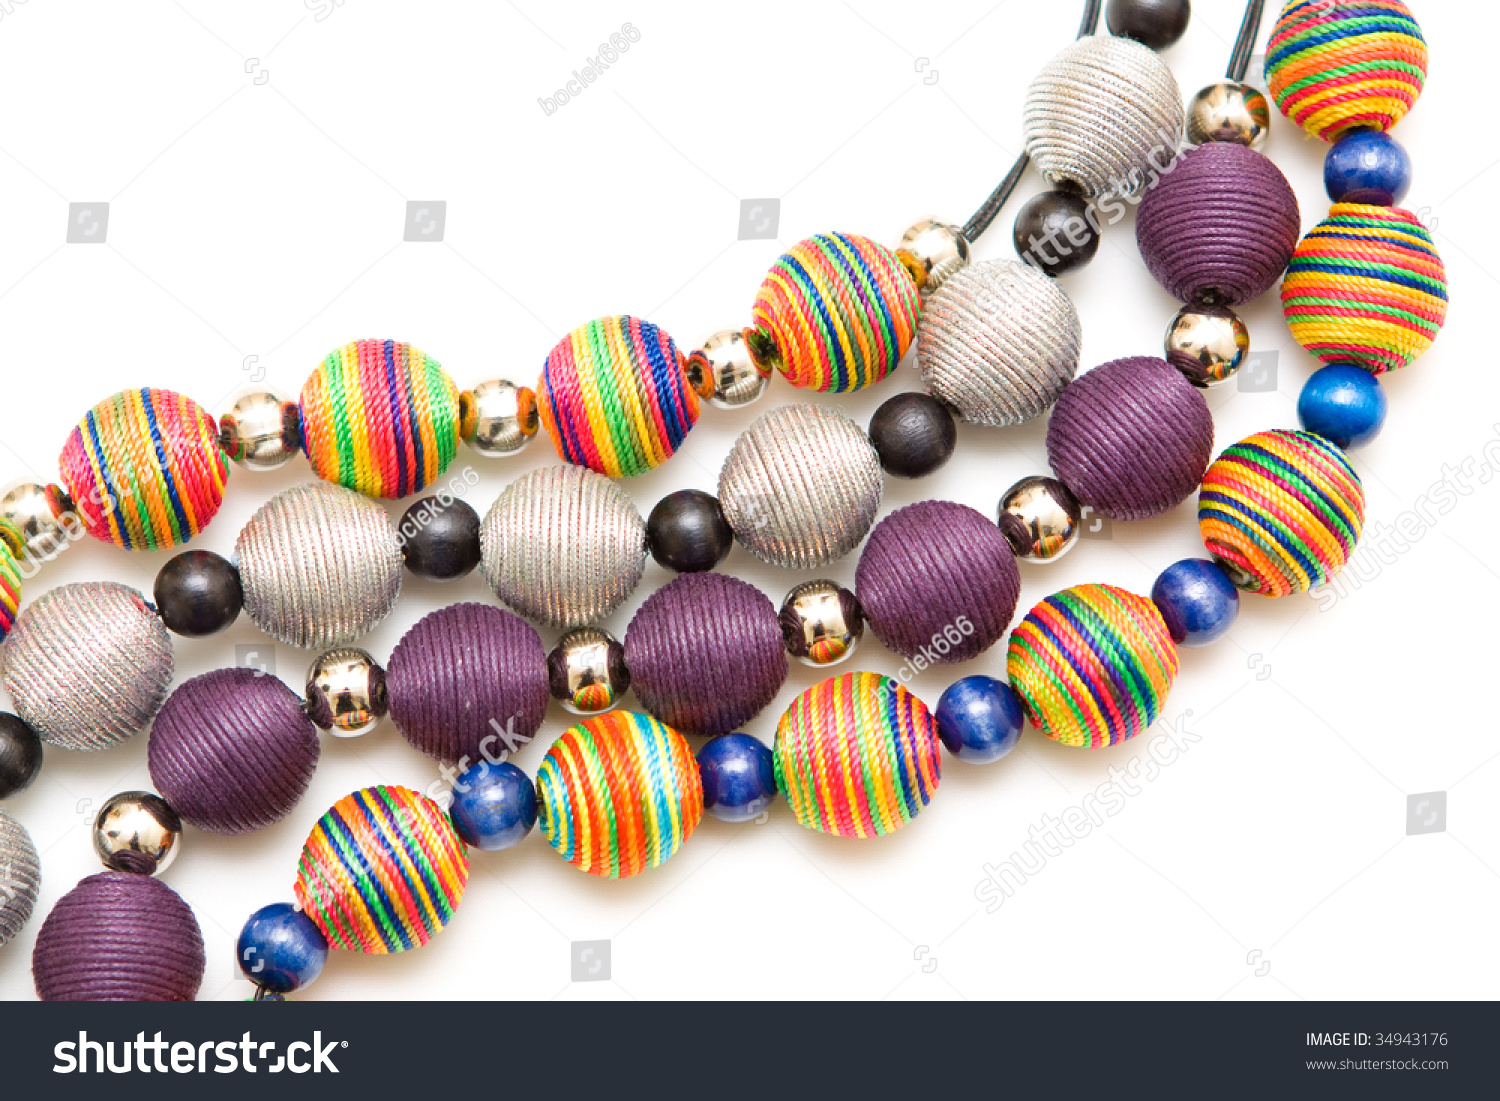 Abstract Jewellery And Beads Background Stock Photo 34943176 : Shutterstock